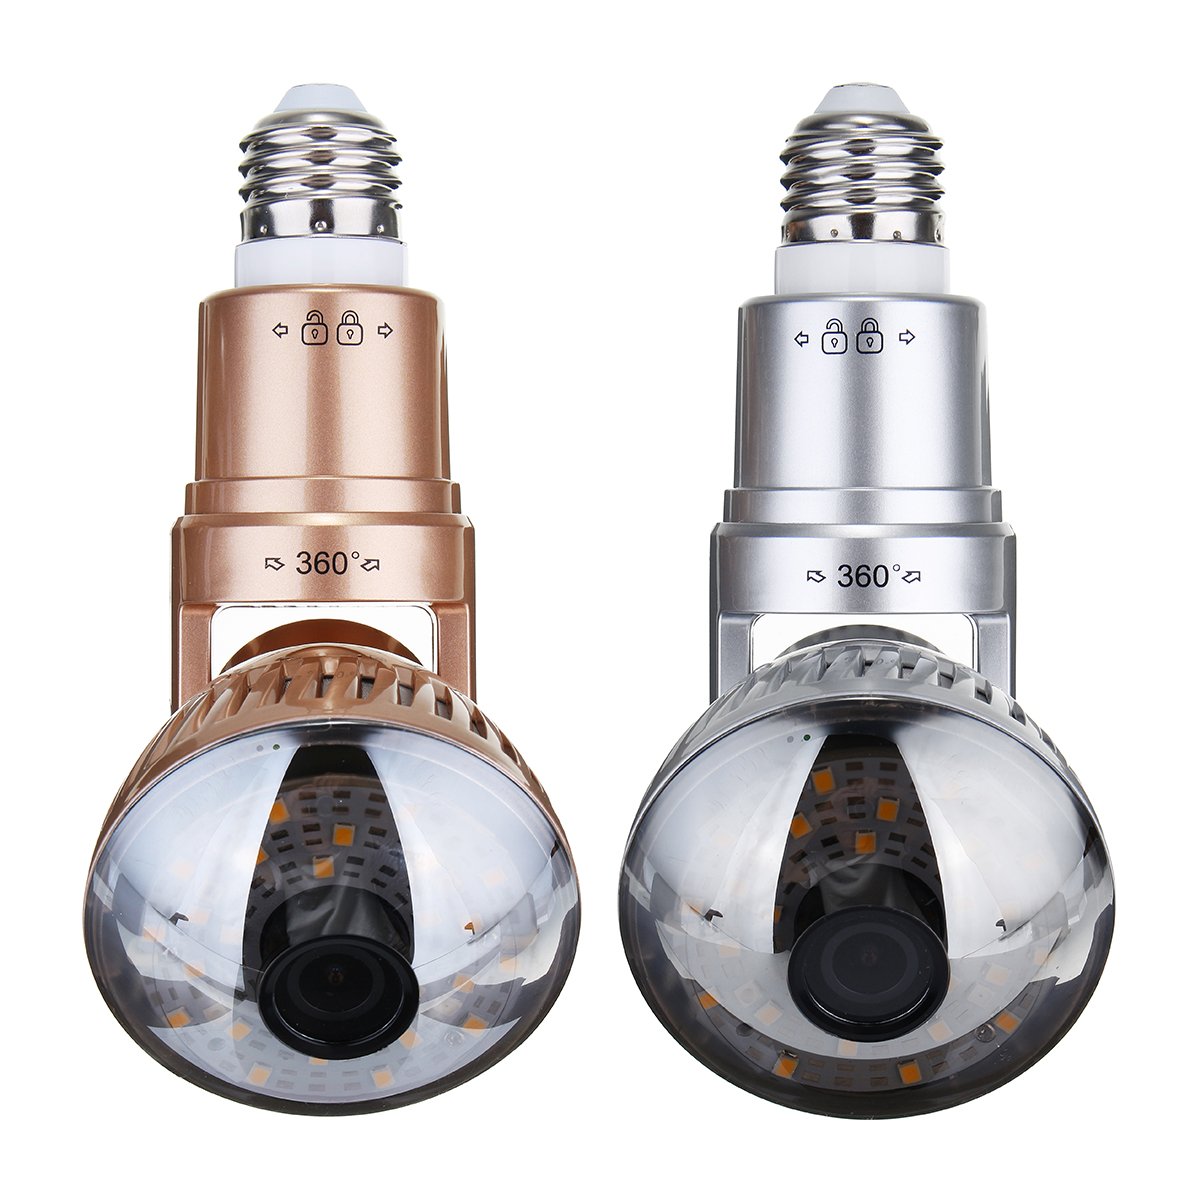 3.6mm Wireless Mirror Bulb Security Camera DVR WIFI LED Light IP Camera Motion Detection 2